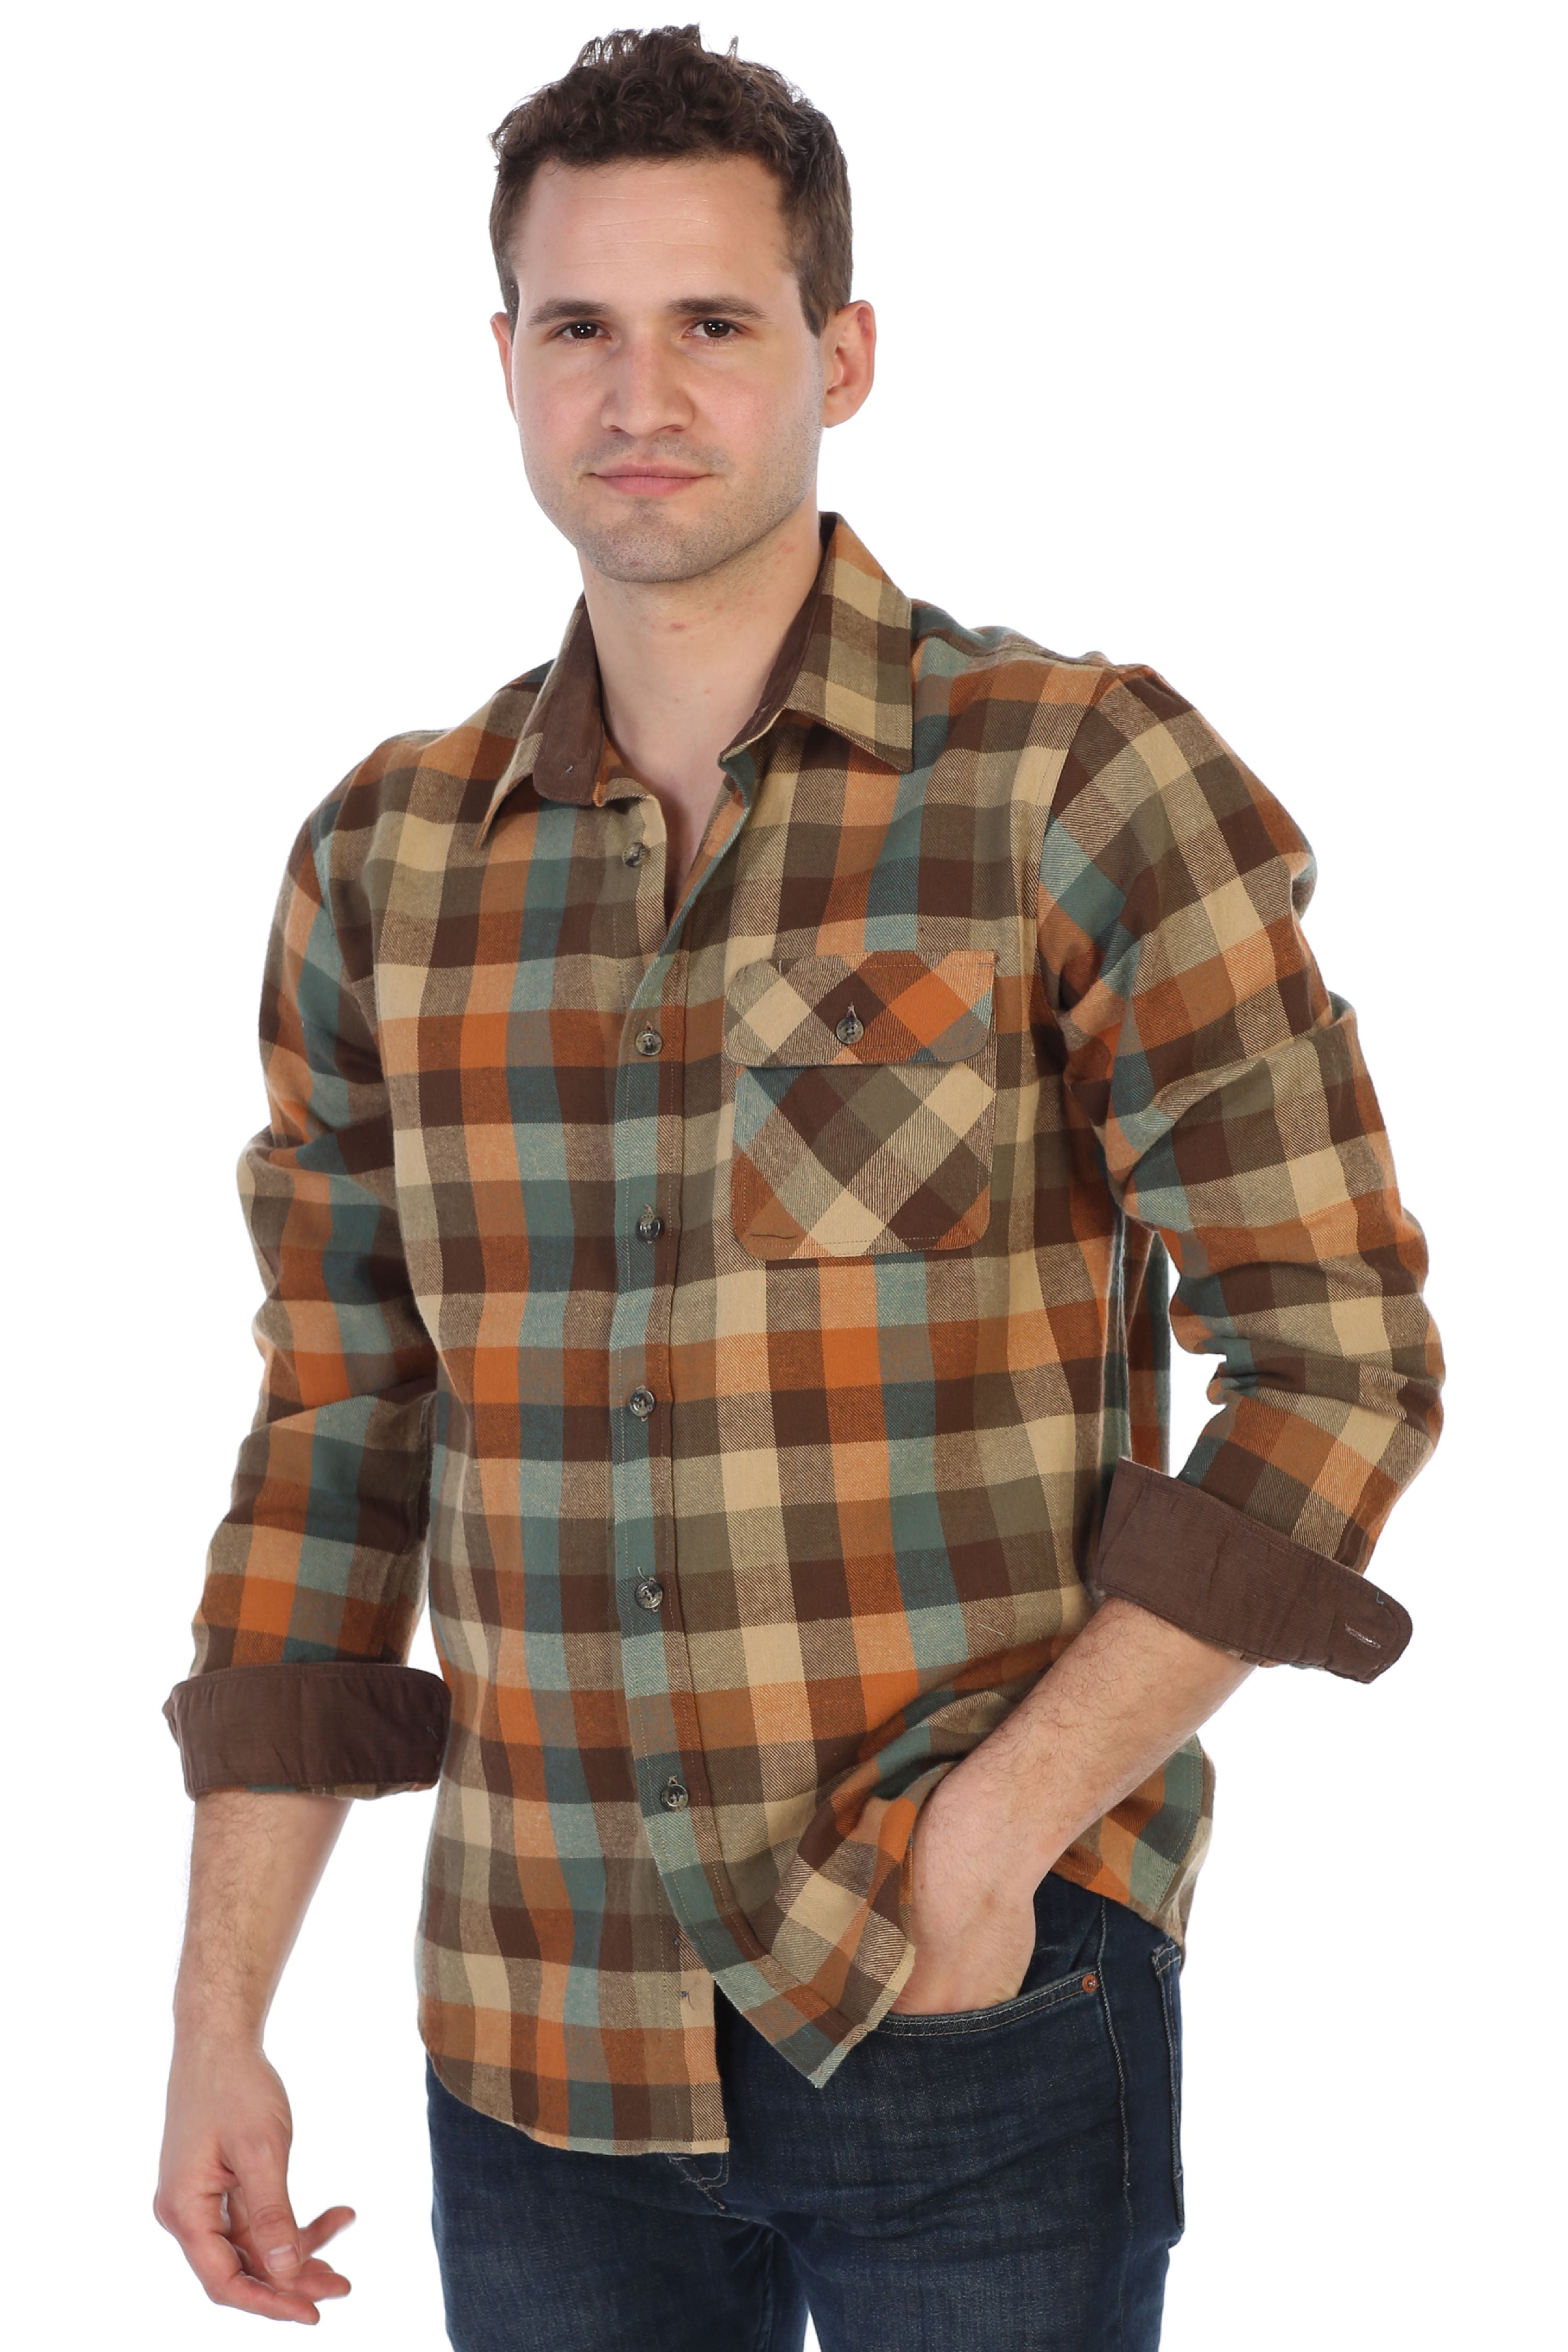 Gioberti Men's 100% Cotton Brushed Flannel Plaid Checkered Shirt with Corduroy Contrast 